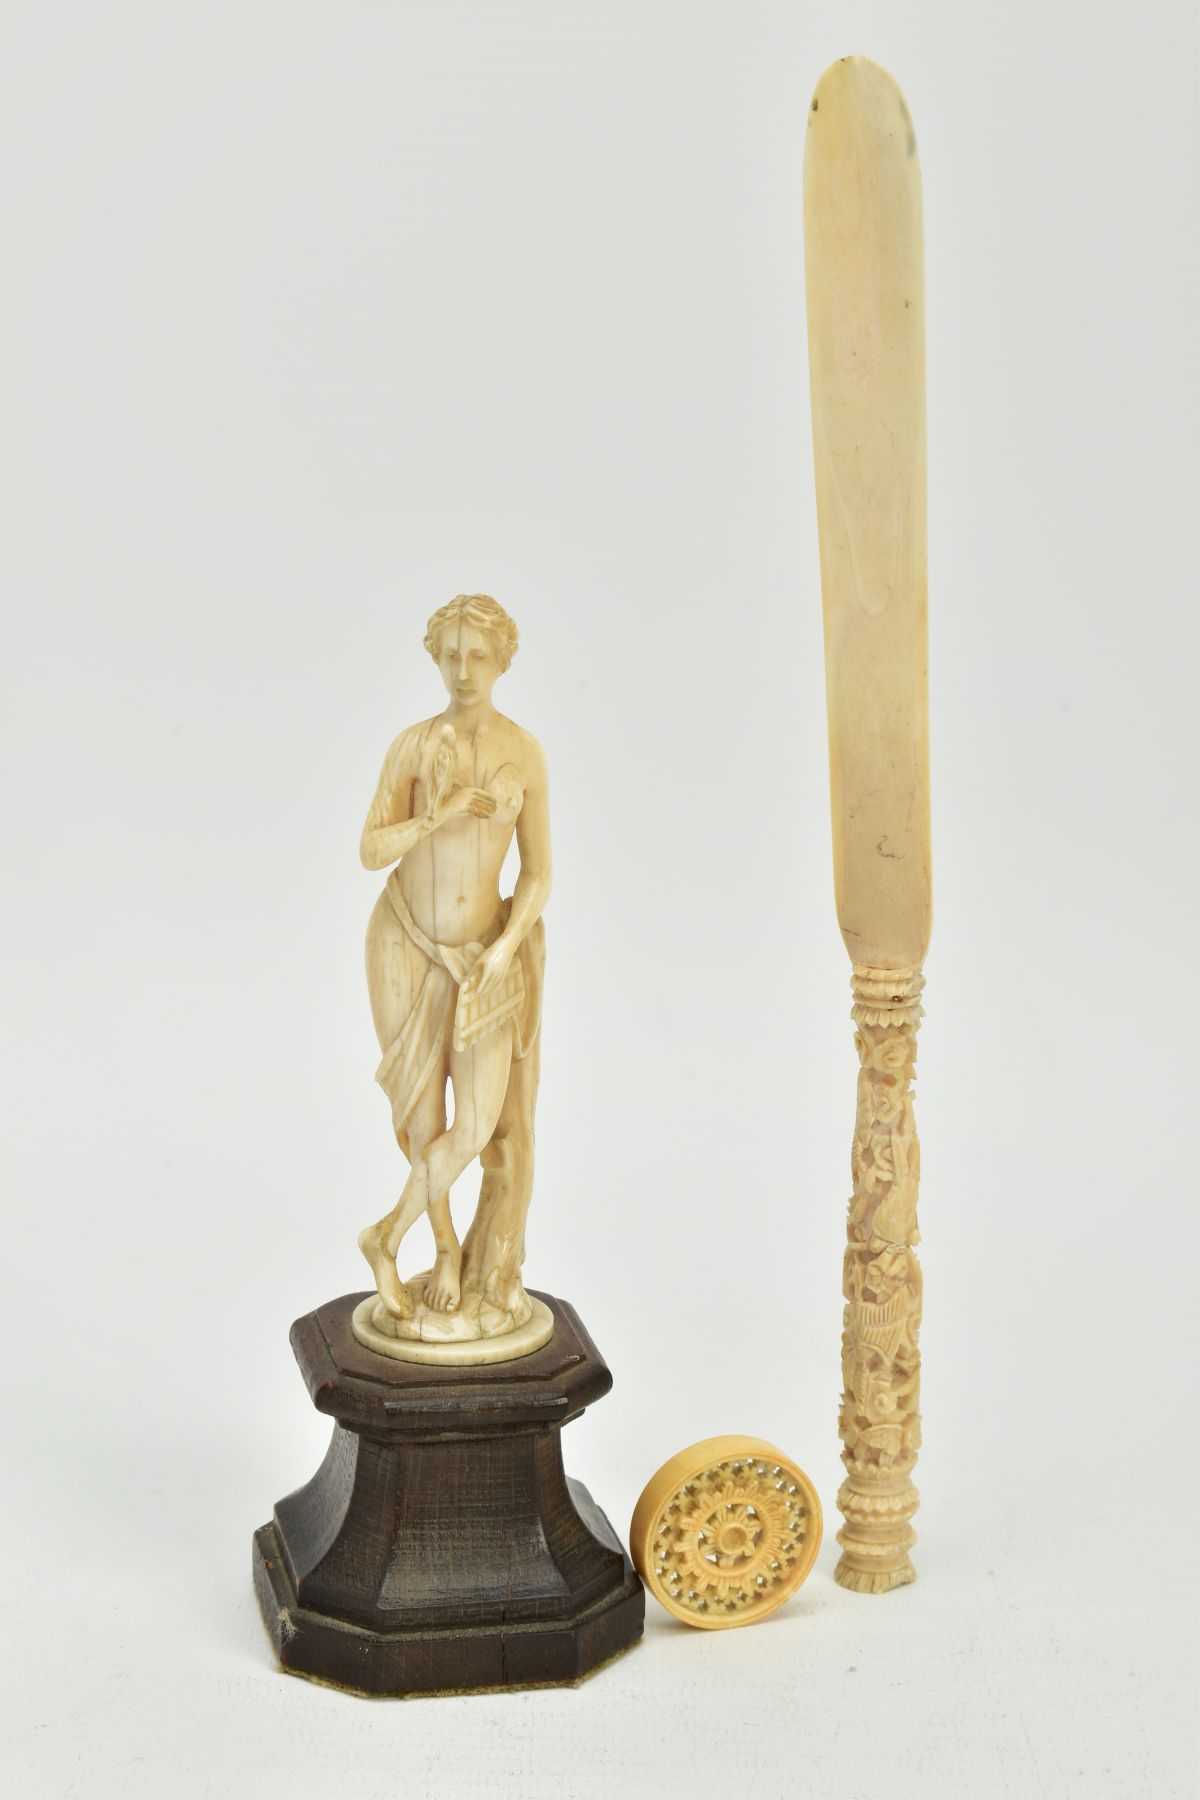 A 19TH CENTURY CARVED IVORY FIGURE OF A SCANTILY CLAD FEMALE WITH A BIRD AND PIPES, mounted on a